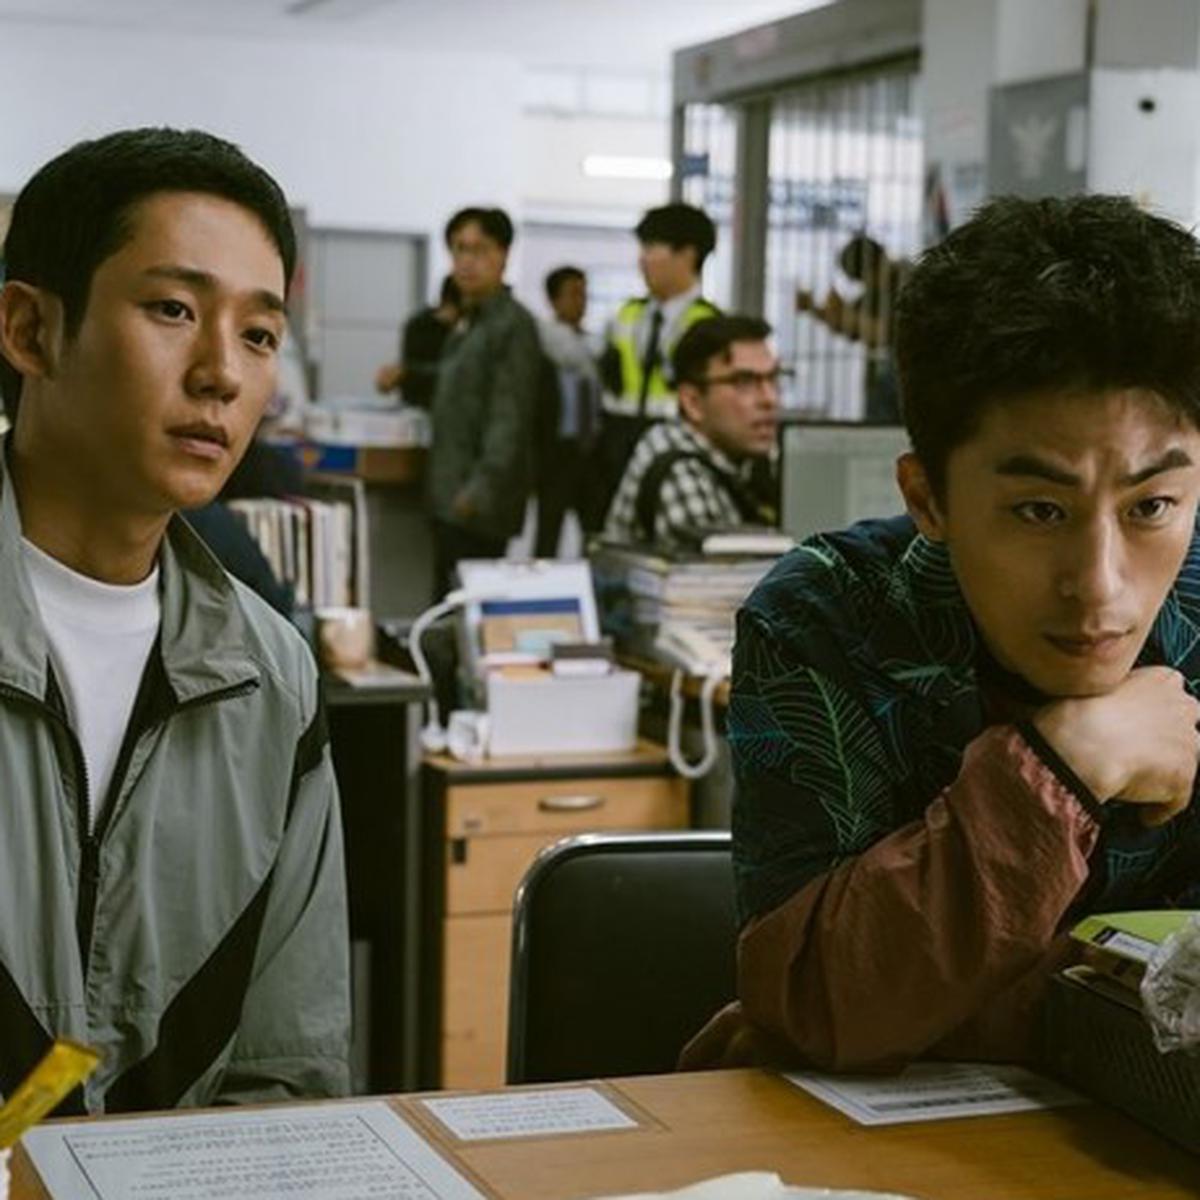 Chemistry and comedy make 'King the Land' a must watch